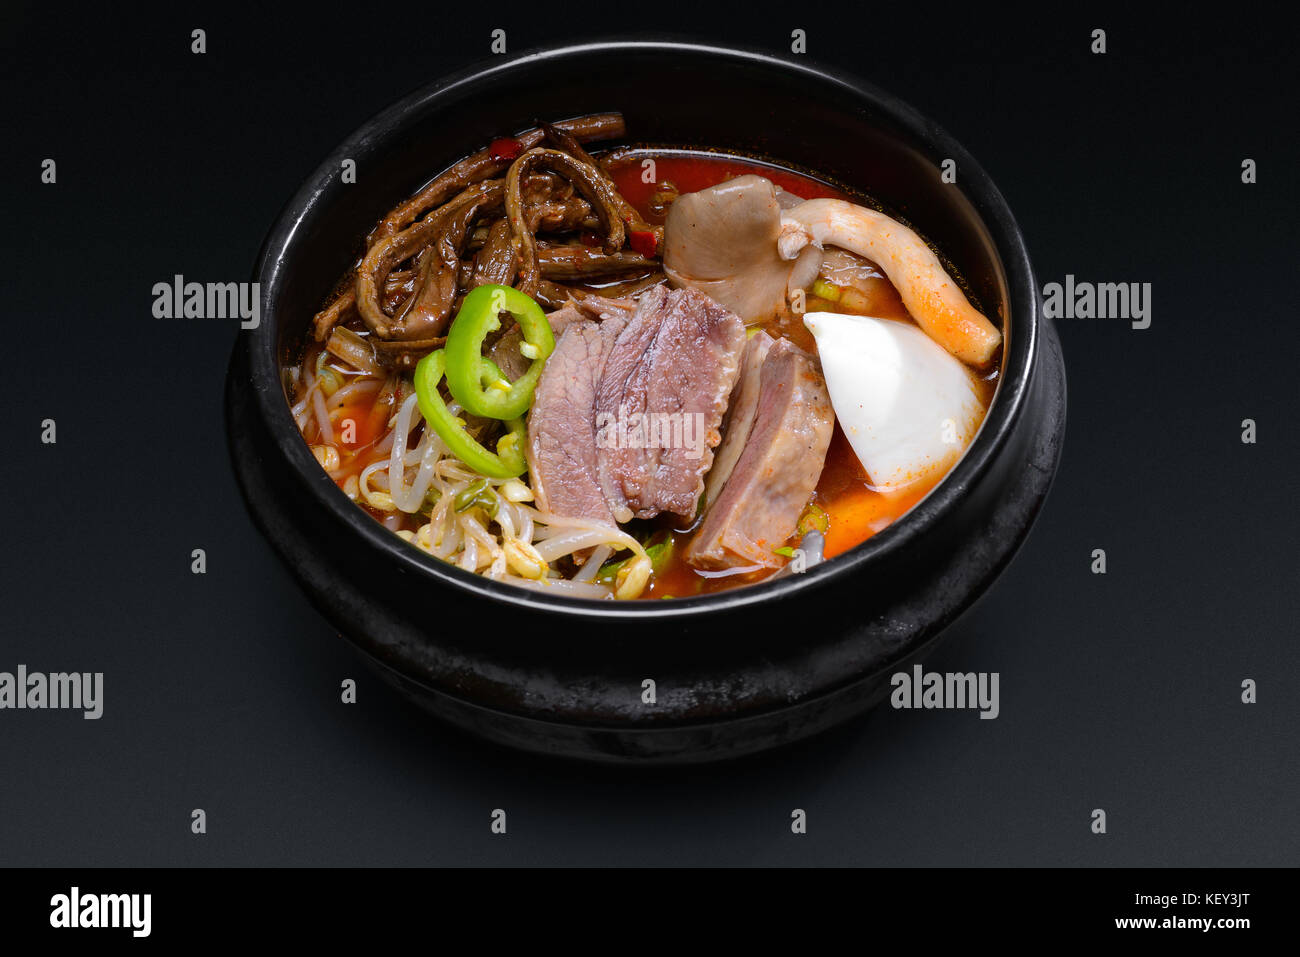 Korean soup with meat and mushrooms Stock Photo